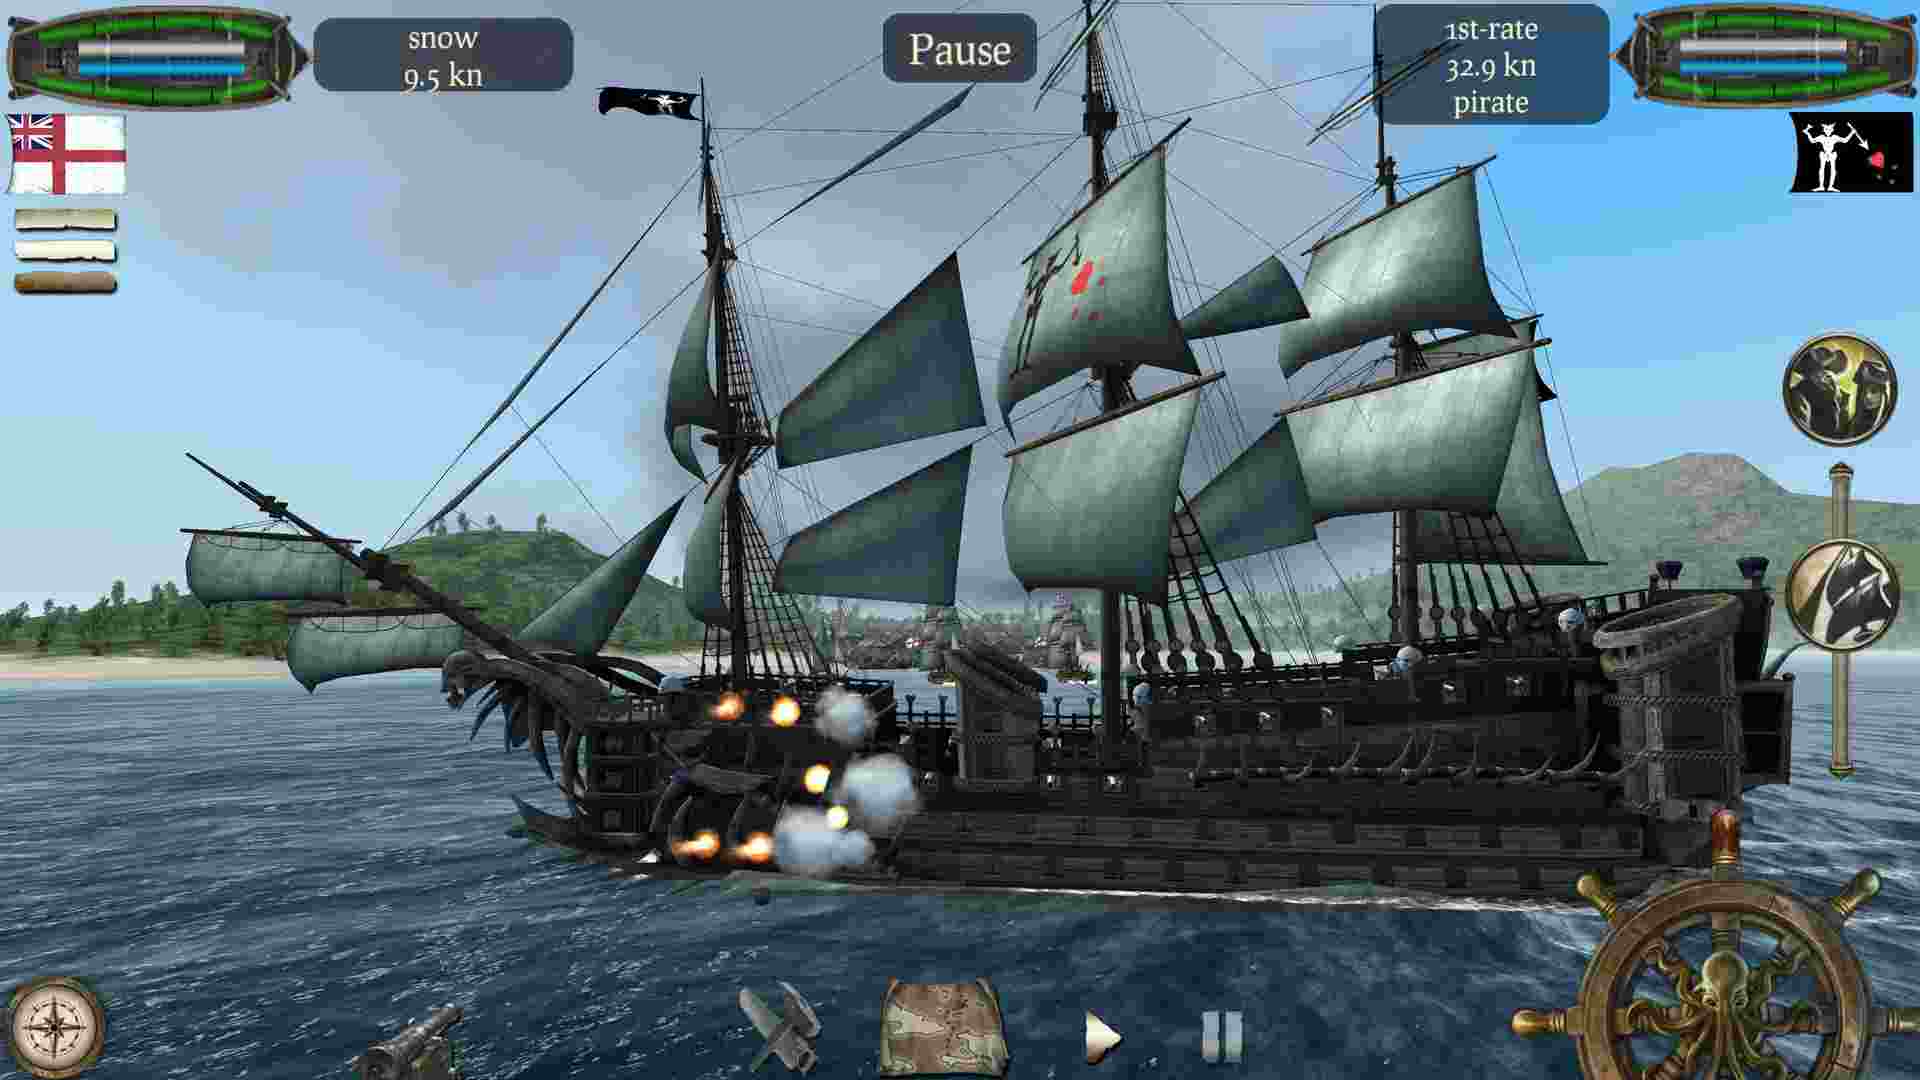 The Pirate Plague of the Dead Mod APK